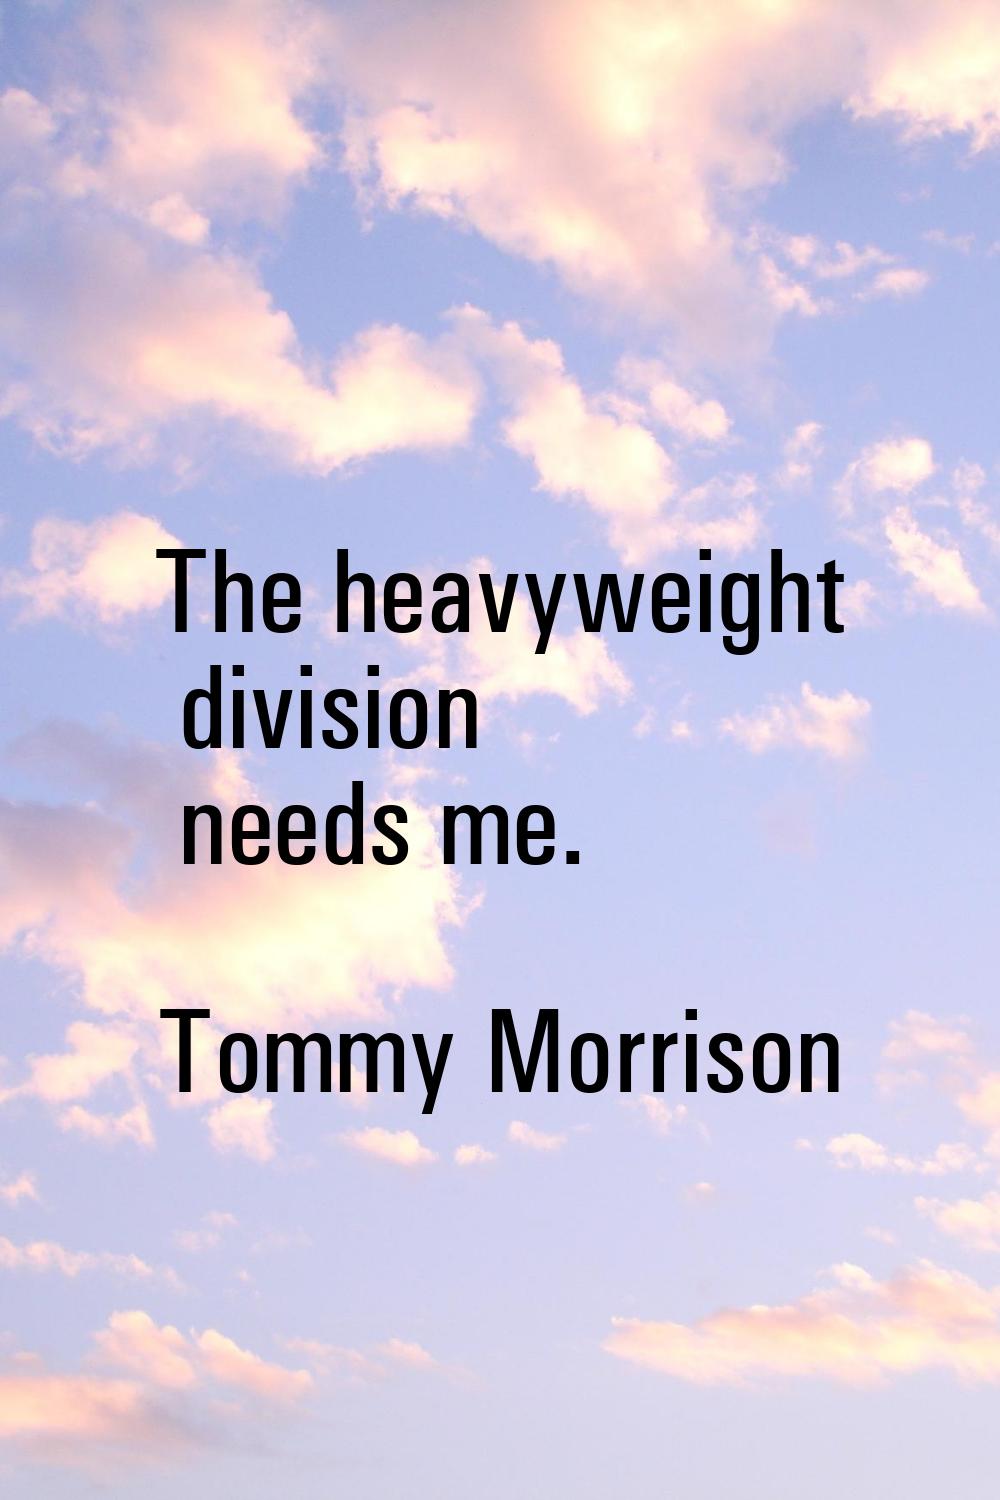 The heavyweight division needs me.